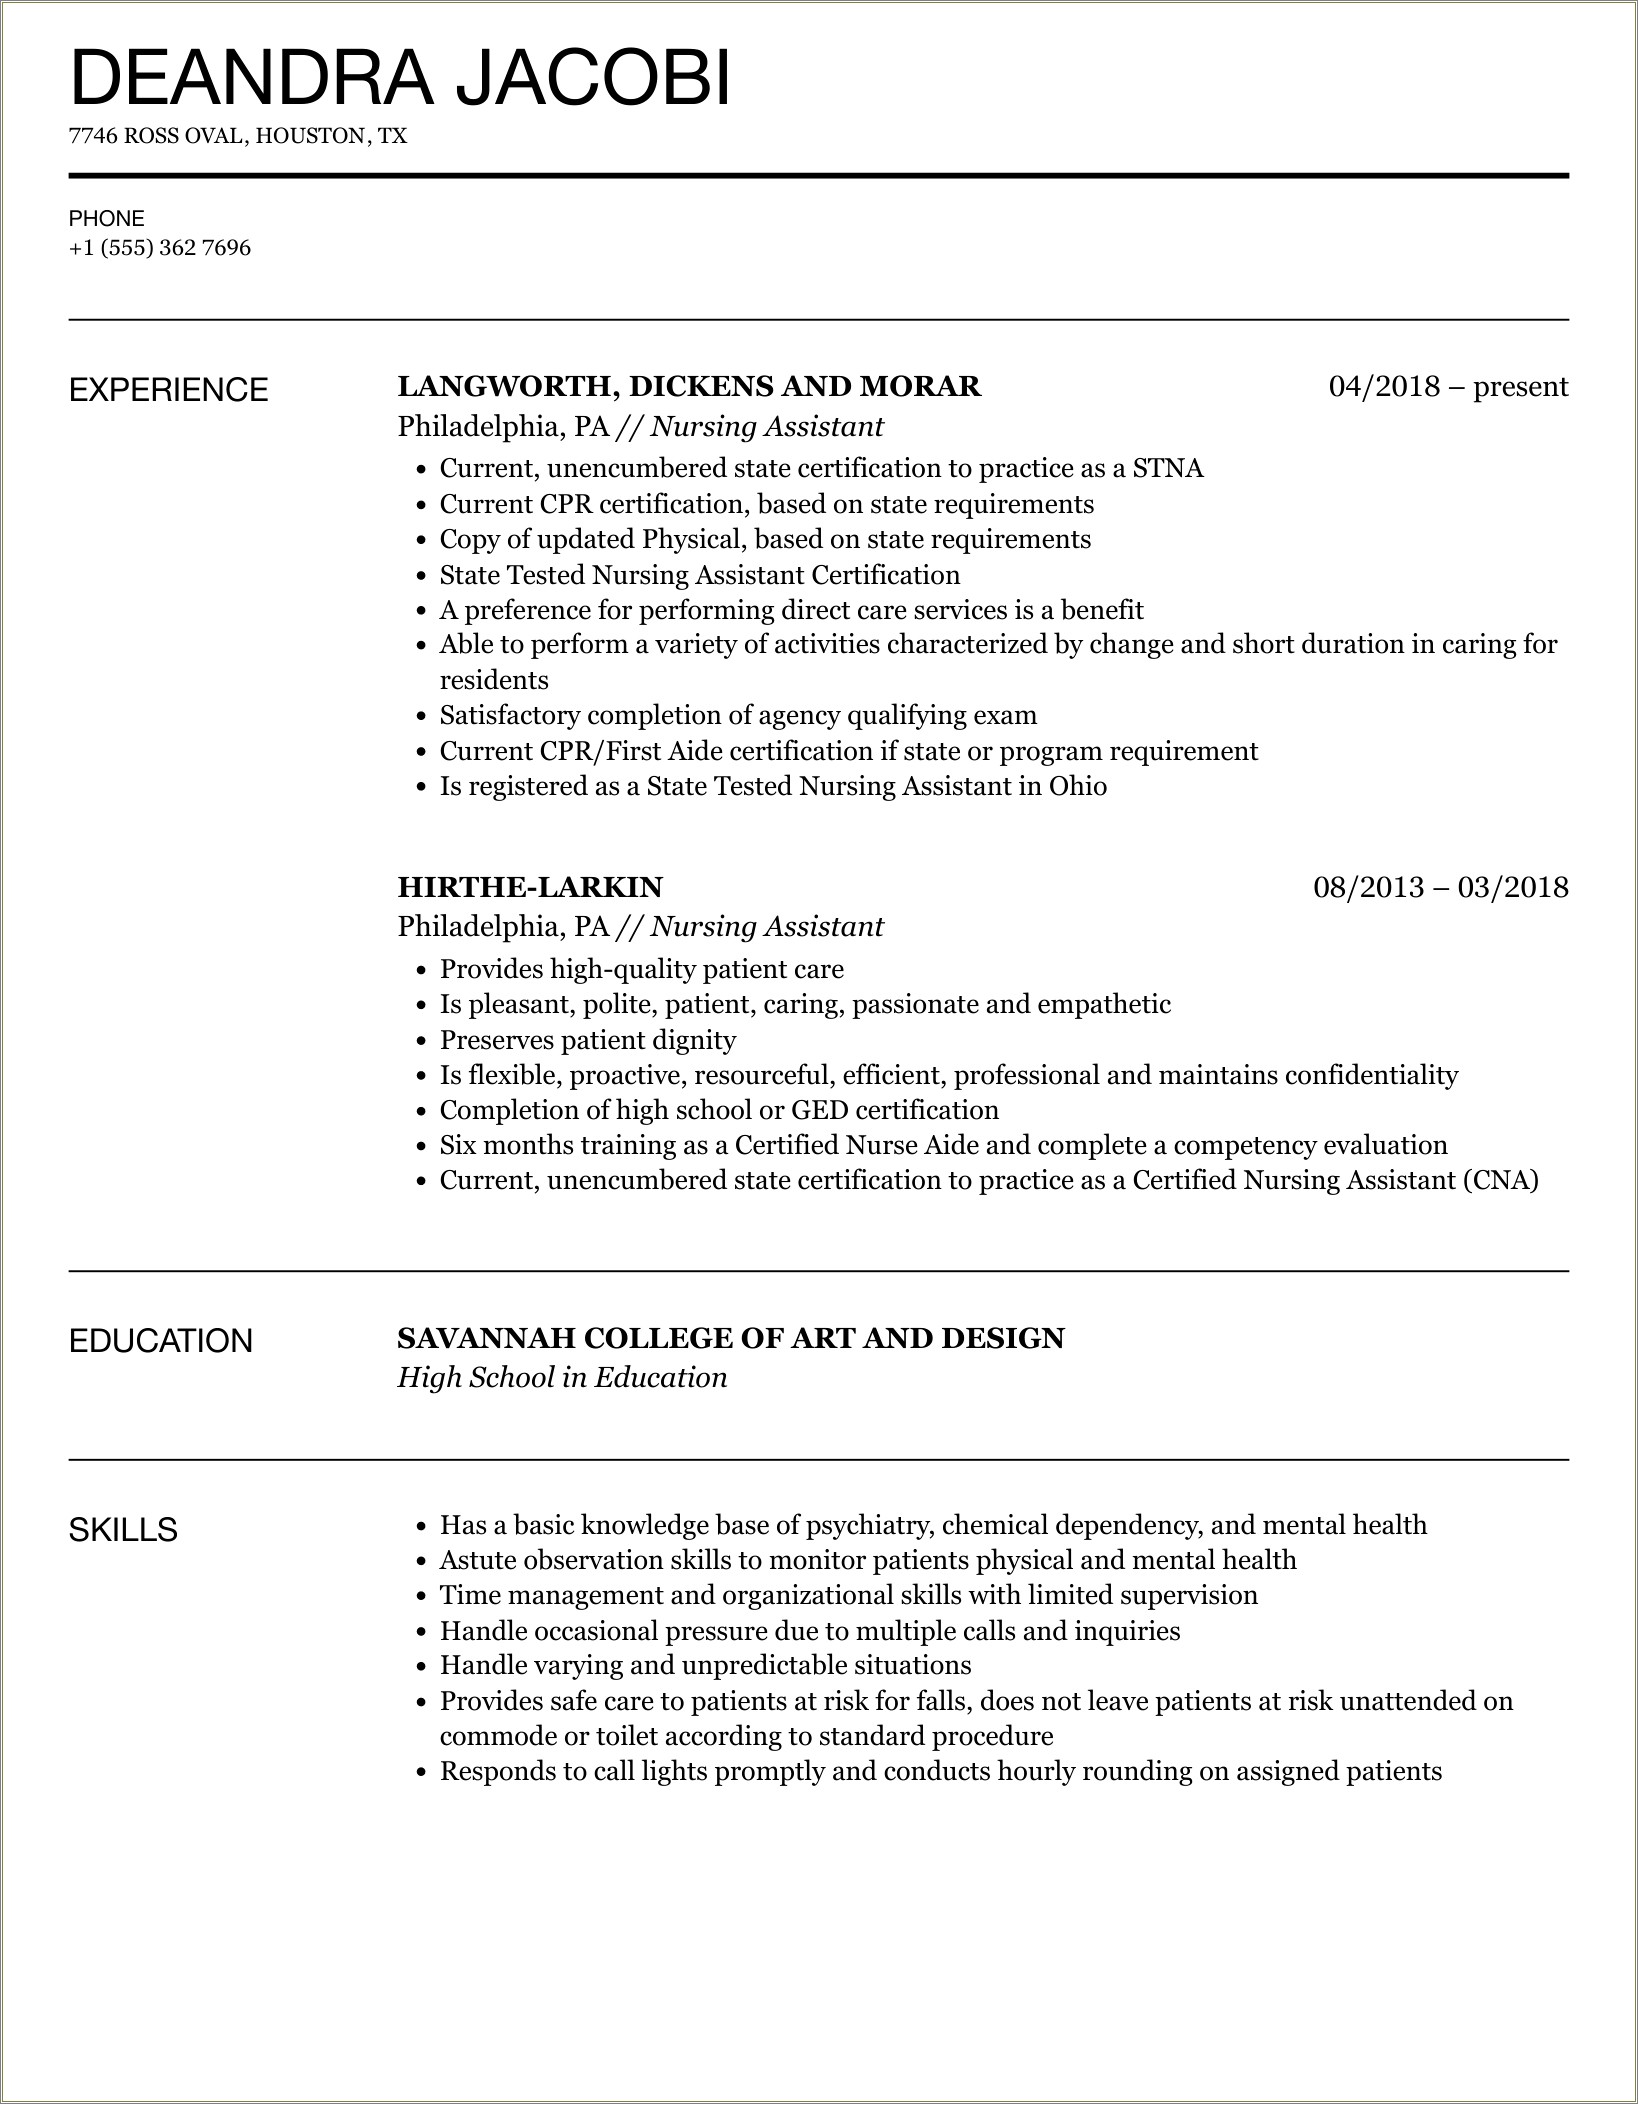 Best Summary For Cna On Resume